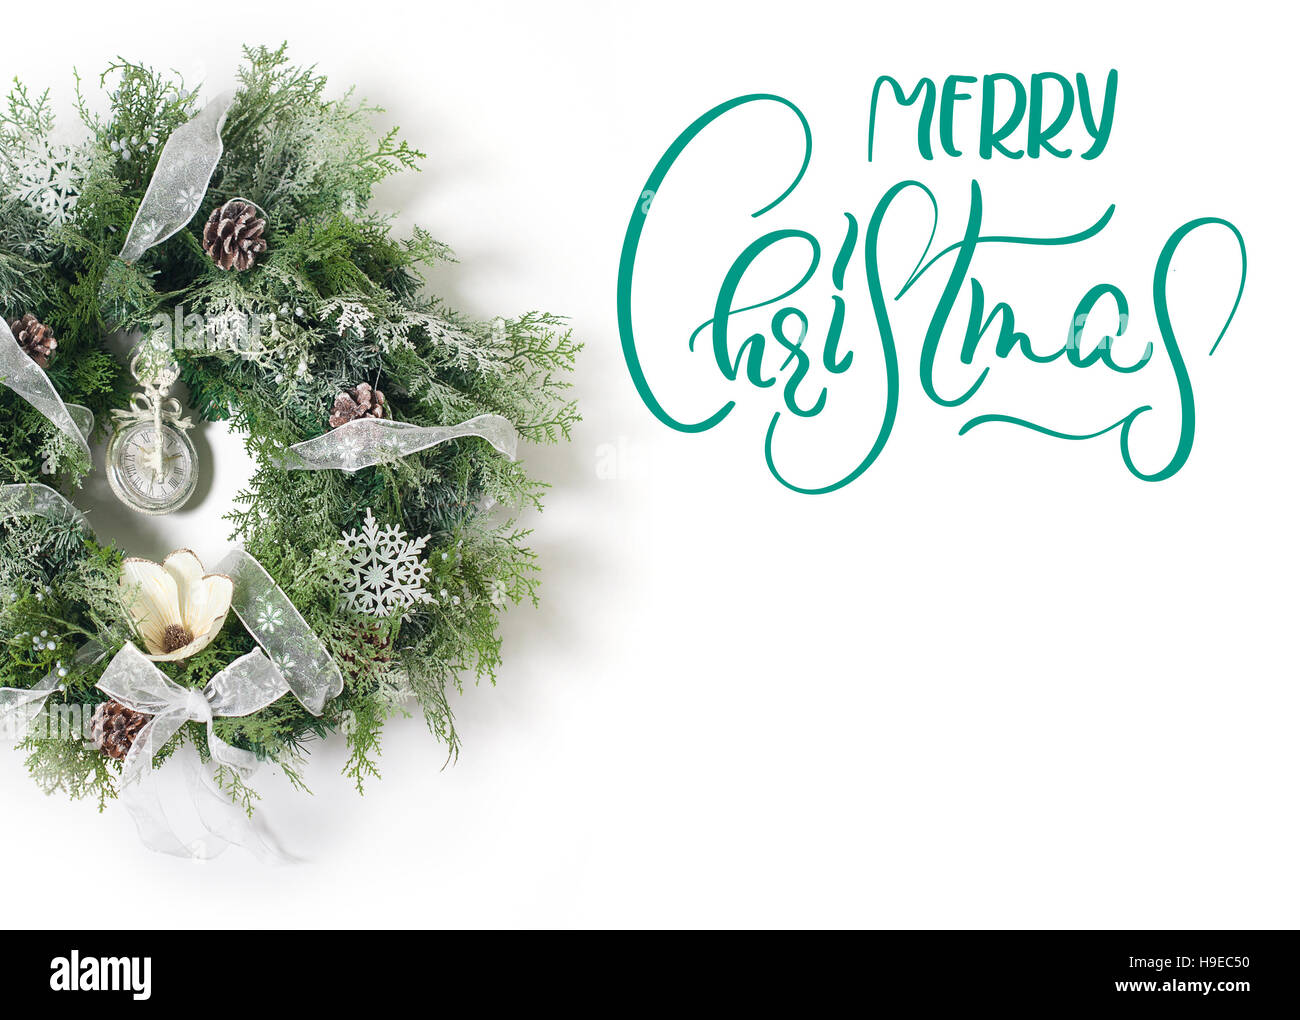 Christmas wreath on white background. Calligraphy lettering Stock Photo